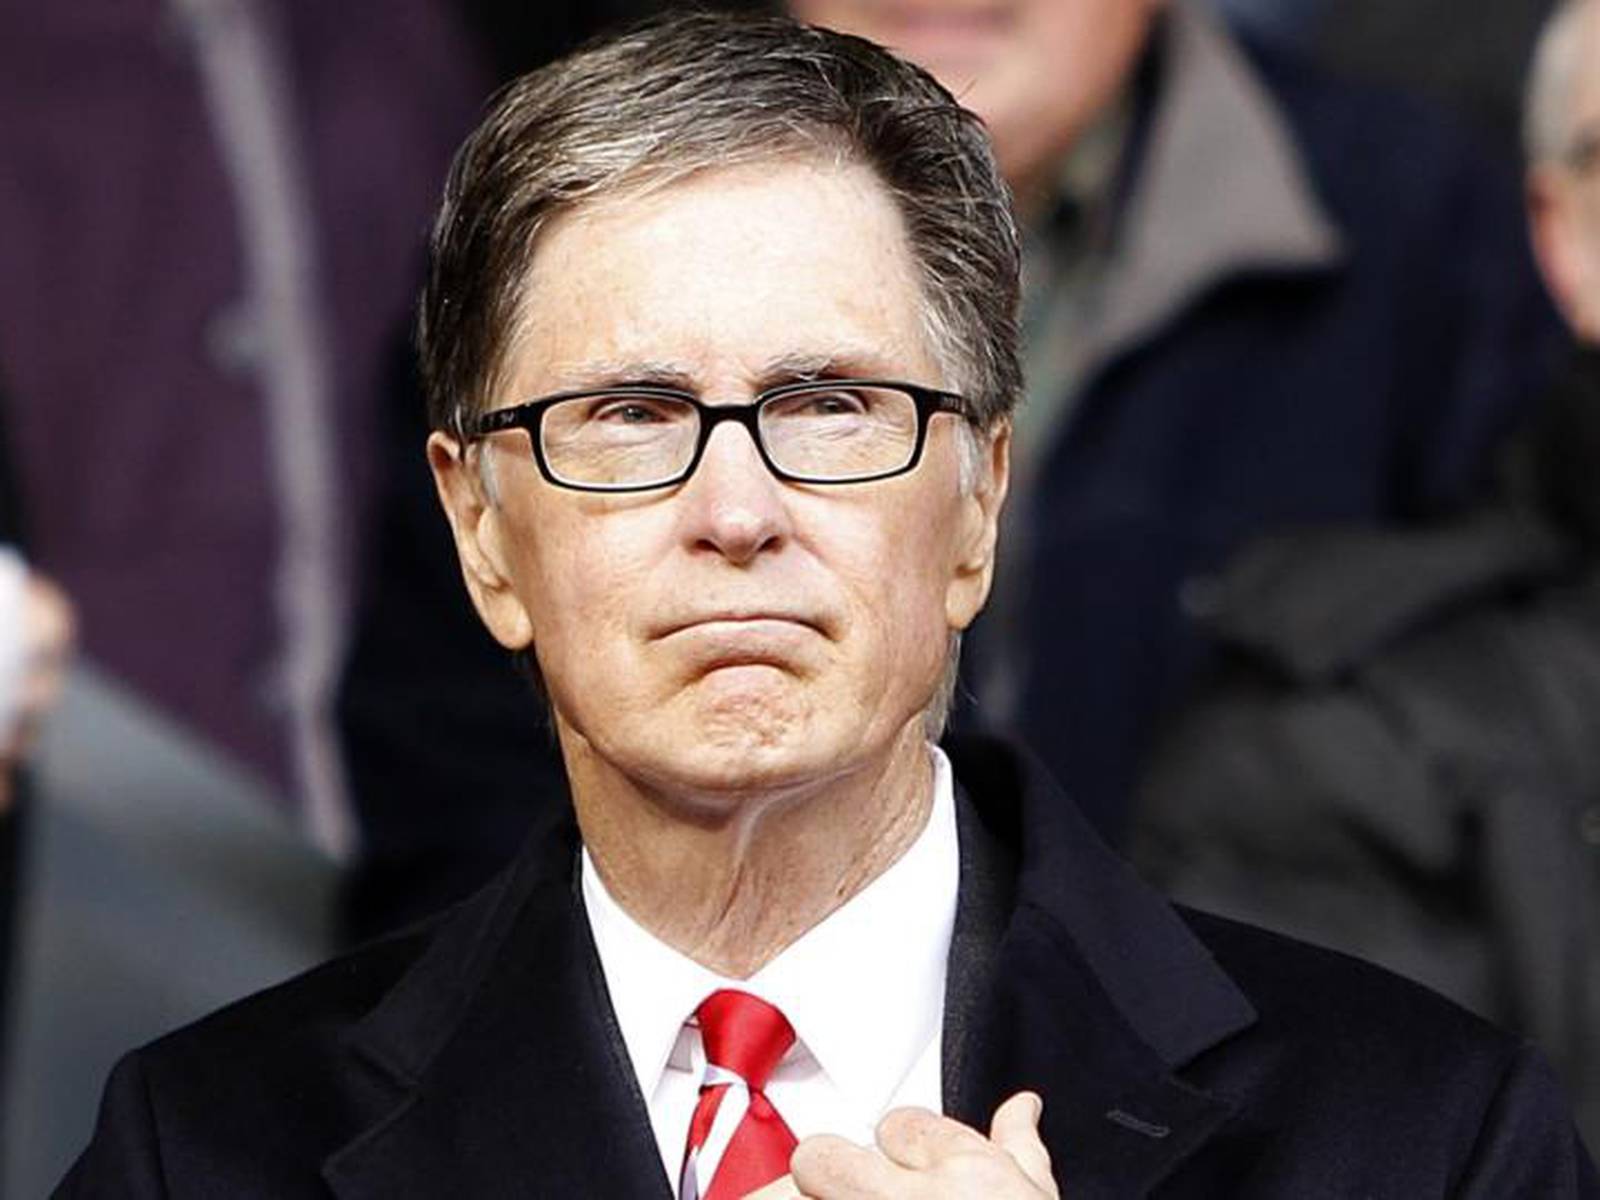 Liverpool owner John W Henry says commitment to club 'stronger than ever', Liverpool